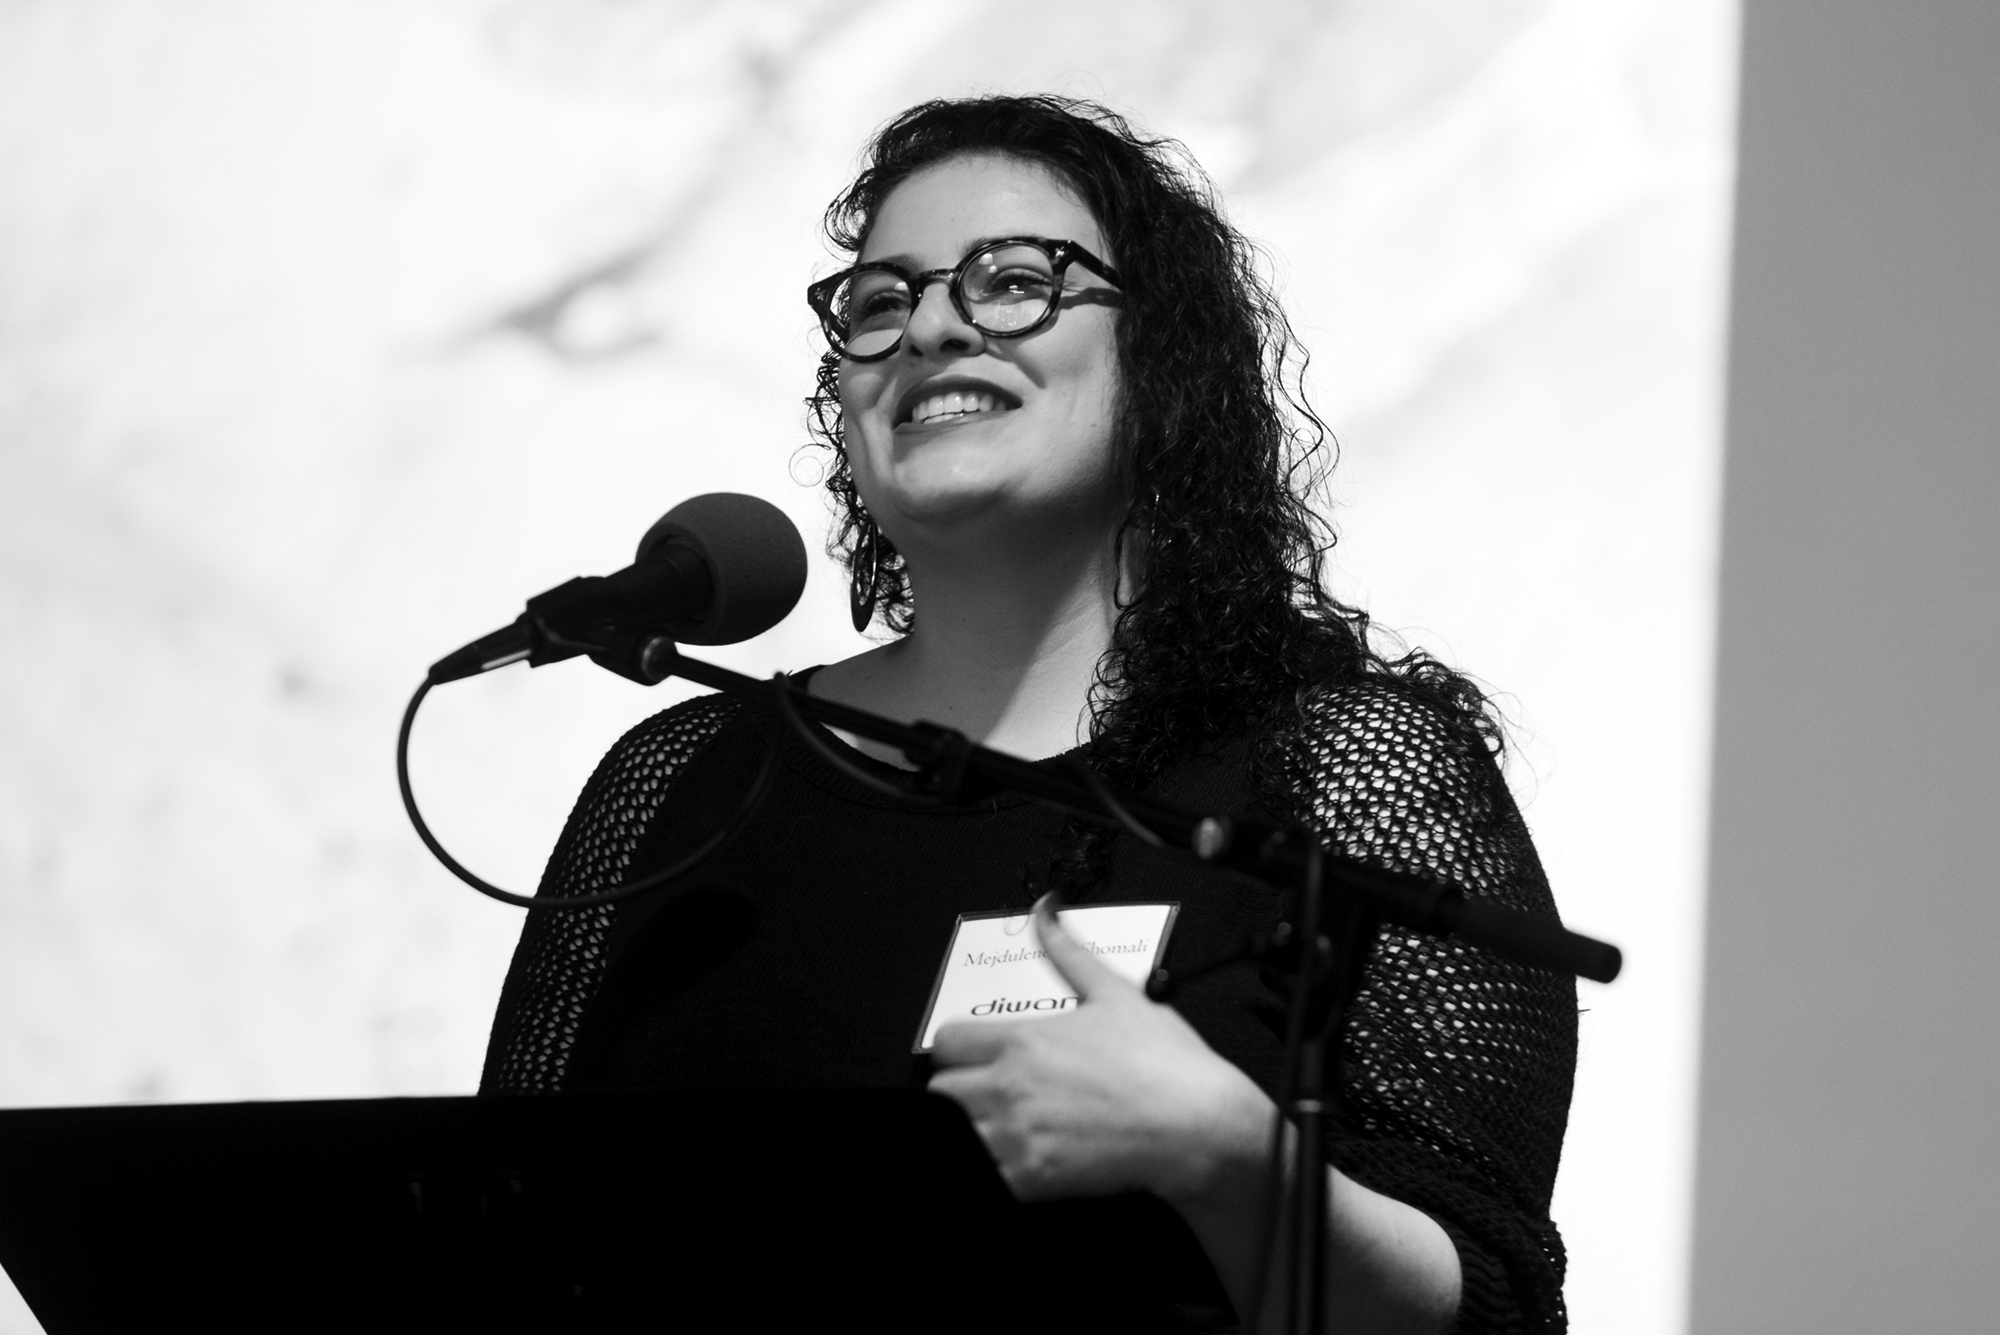 A black and white photo of a Palestinian woman smiling while standing behind a podium.